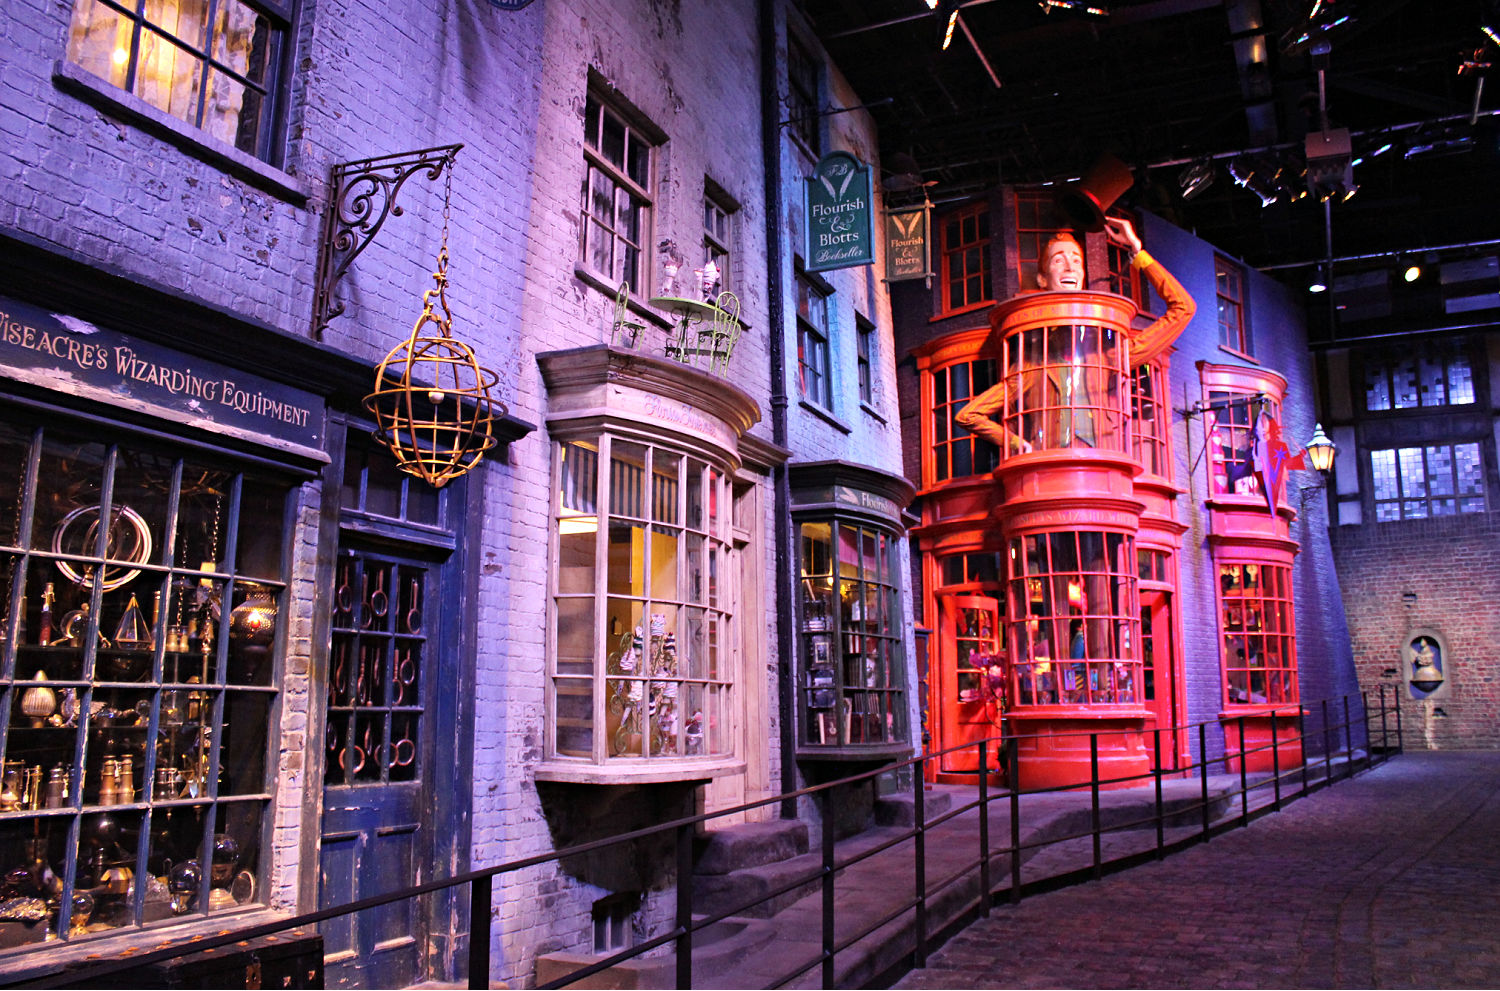 The shops of Diagon Alley at the Warner Bros Harry Potter studio tour - discover the Dark Arts among the magical displays this Halloween in London with kids